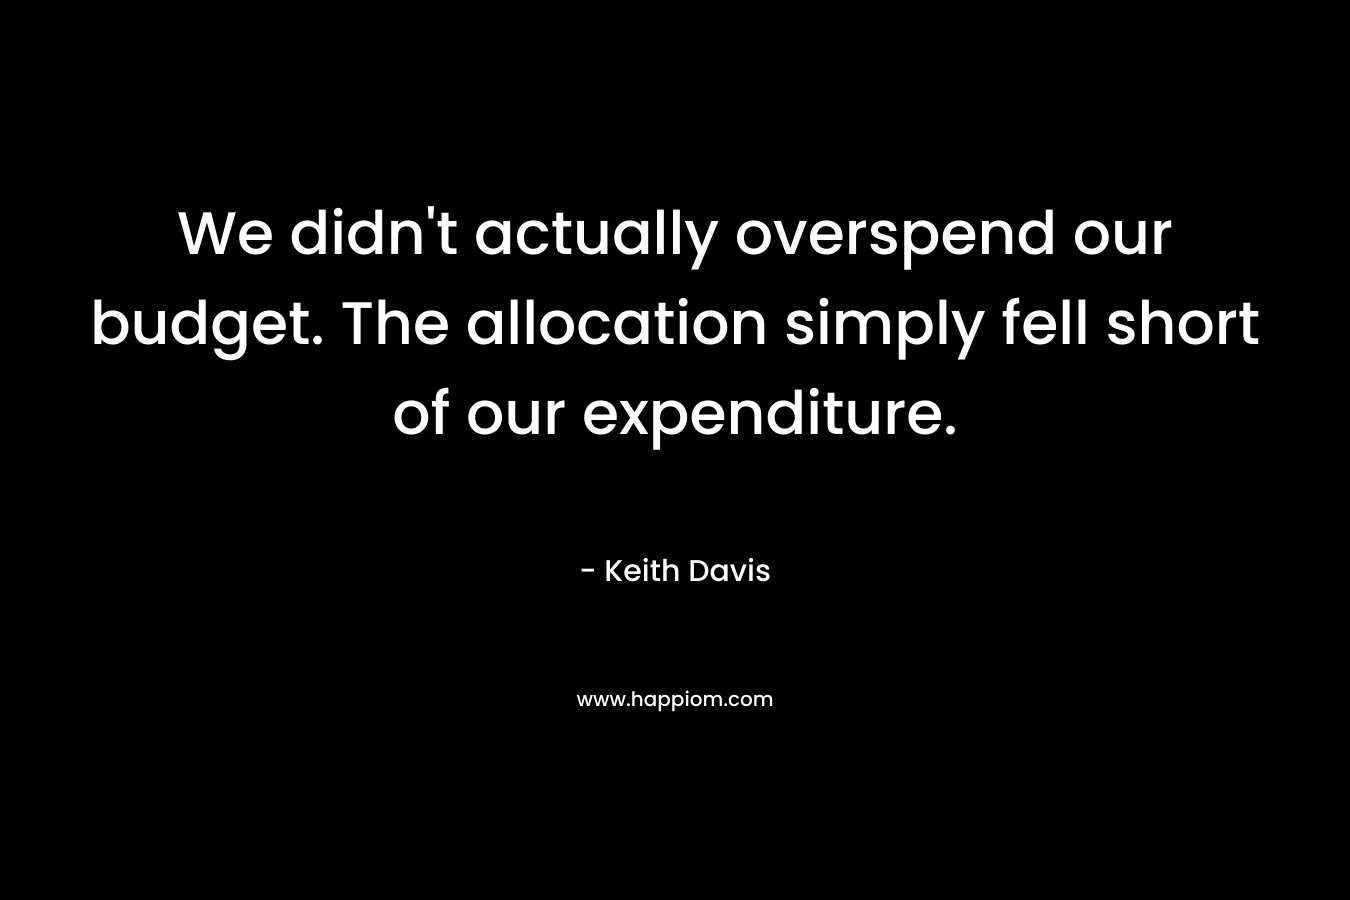 We didn’t actually overspend our budget. The allocation simply fell short of our expenditure. – Keith Davis